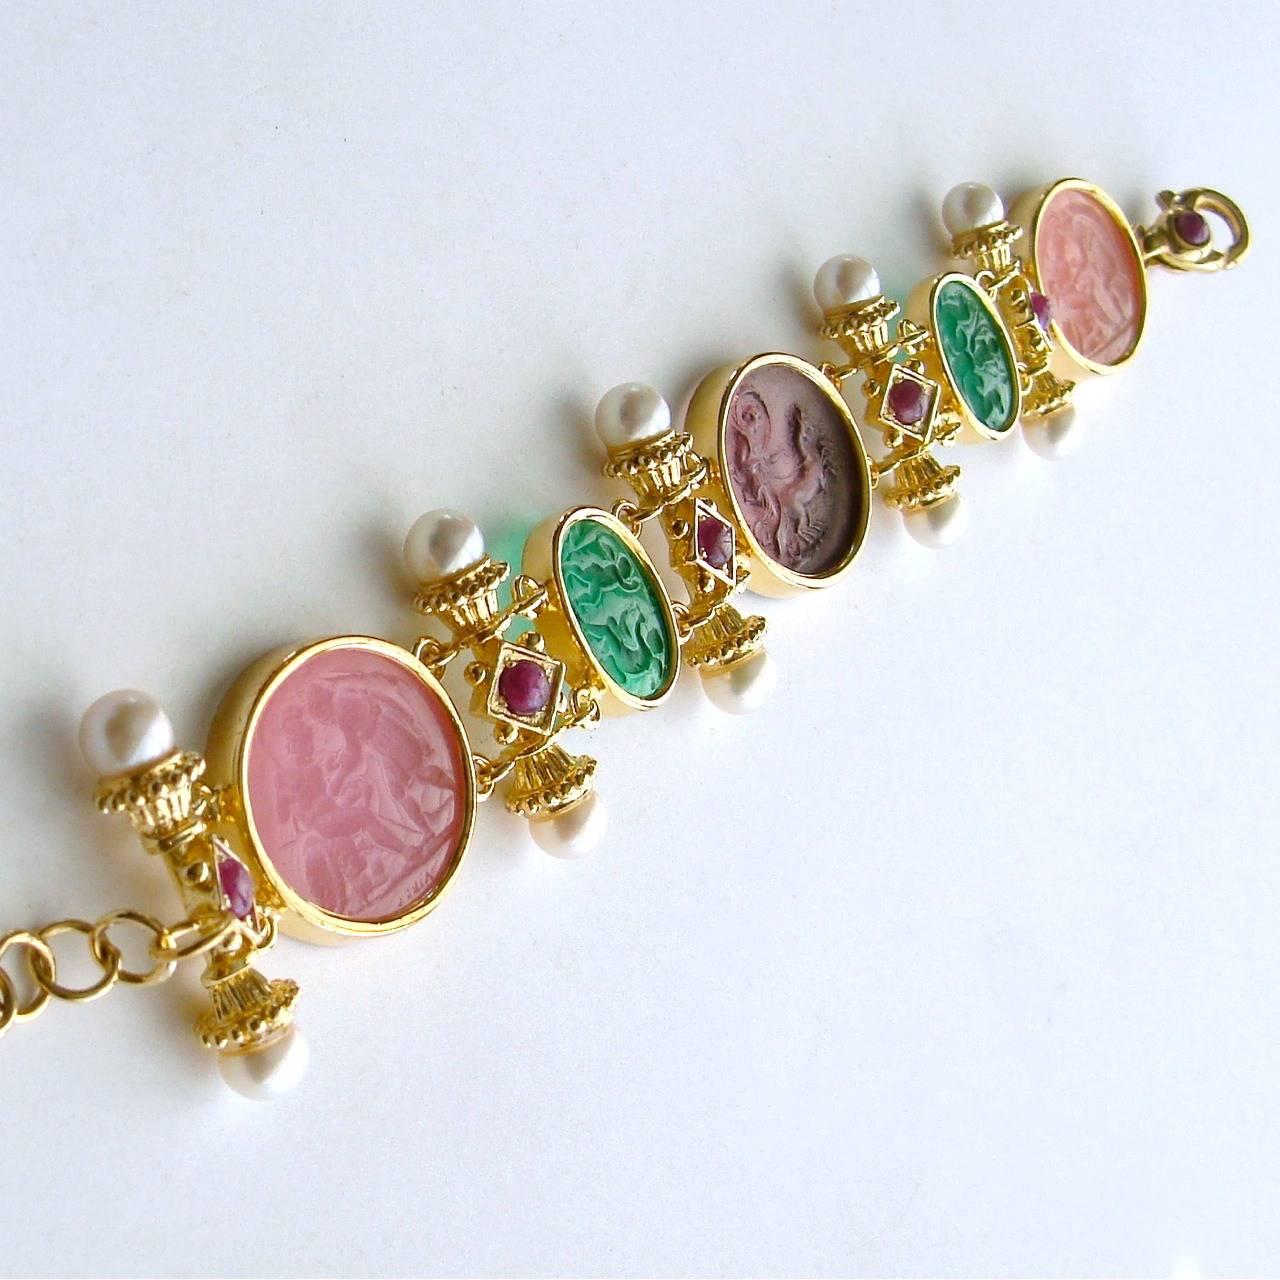 Castelsardo Intaglio Bracelet.

Neoclassical Venetian glass intaglios in gorgeous Spring colors have been artfully separated with Byzantine styled bars, featuring creamy pearls and ruby cabochons.  The generous lobster claw closure has also been